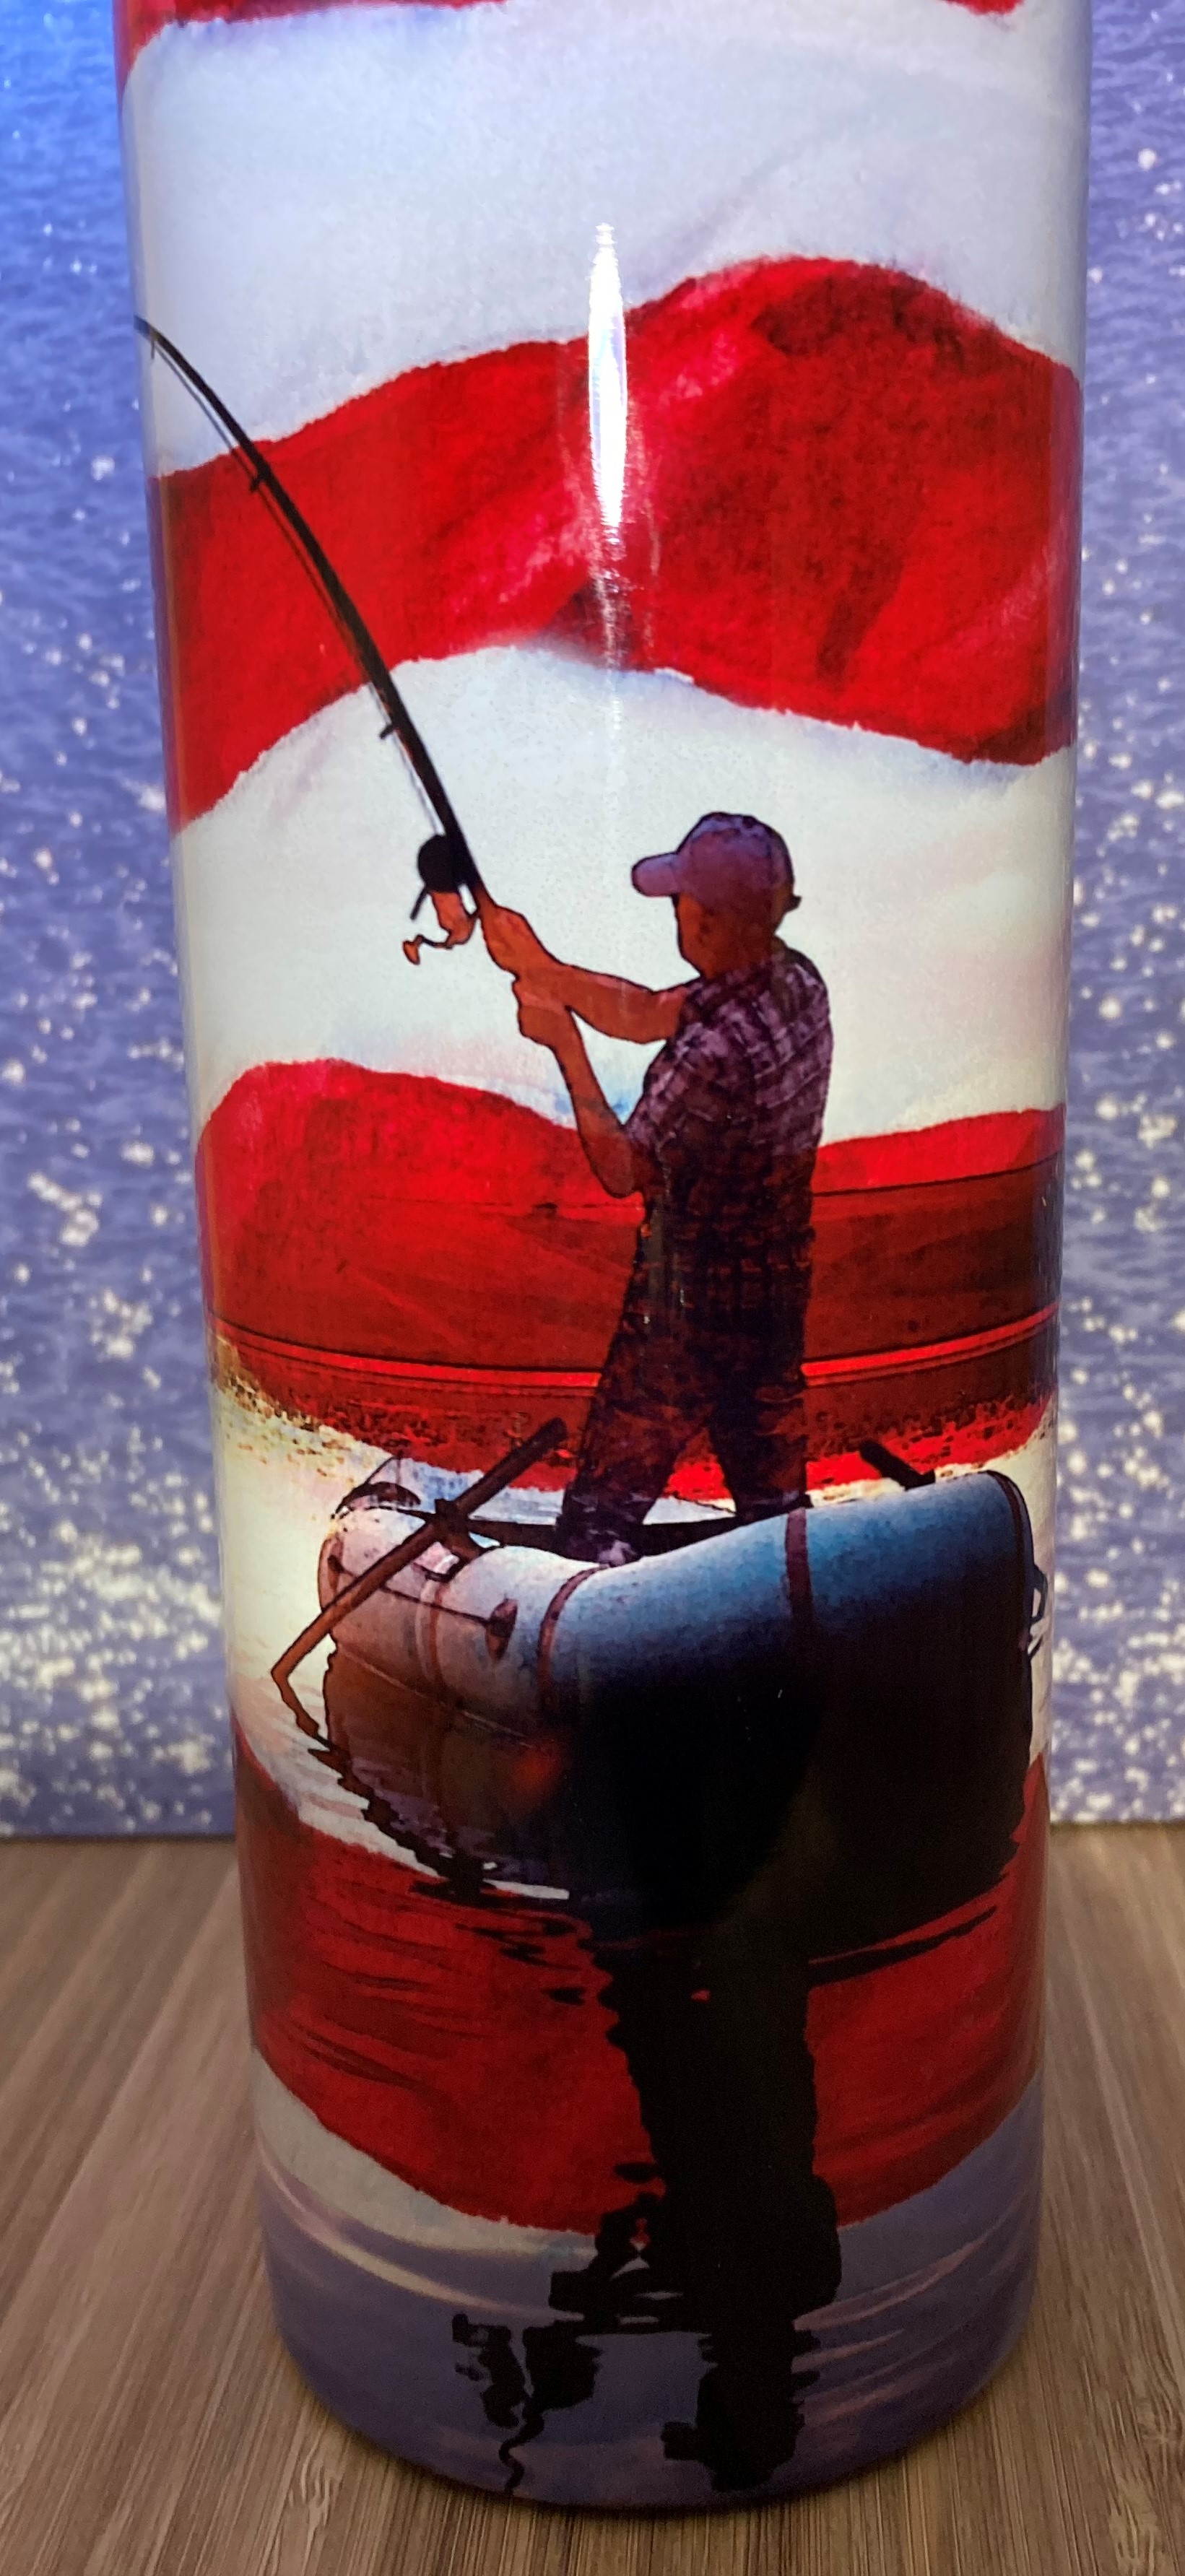 Fishing Tumbler for a Friend